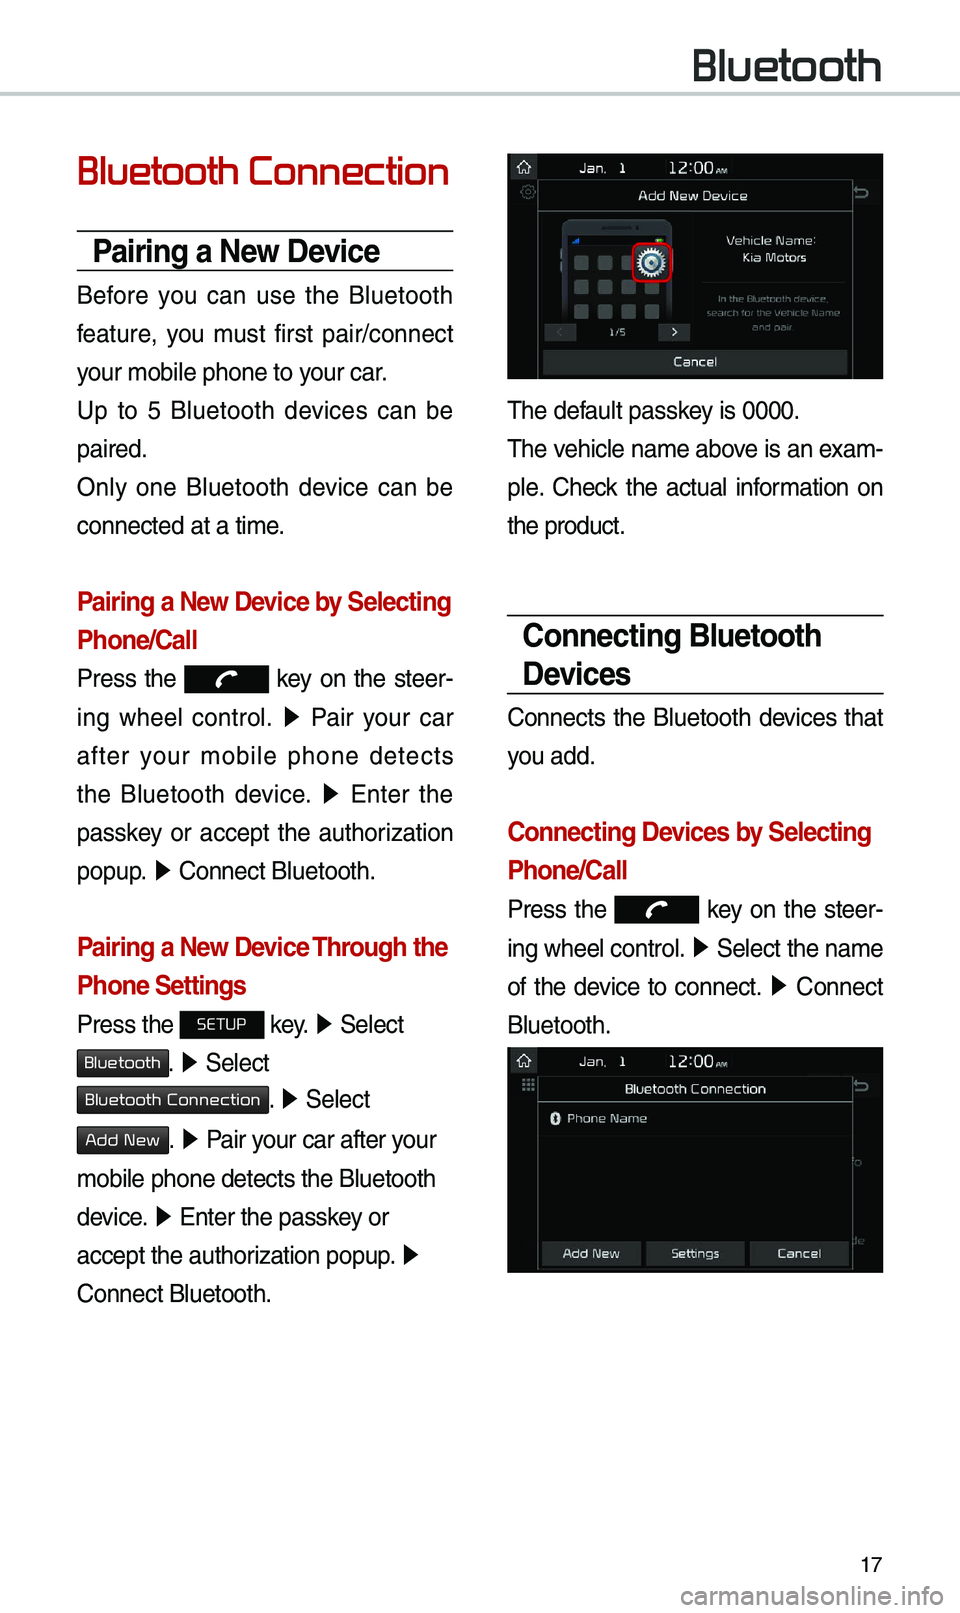 KIA STINGER 2020  Navigation System Quick Reference Guide 17
Bluetooth Connection
Pairing a New Device
Before  you  can  use  the  B\buetooth 
feature,  you  \fust  first  pair/connect 
your \fobi\be phone to \uyour car.
Up  to  5  B\buetooth  devices  can  